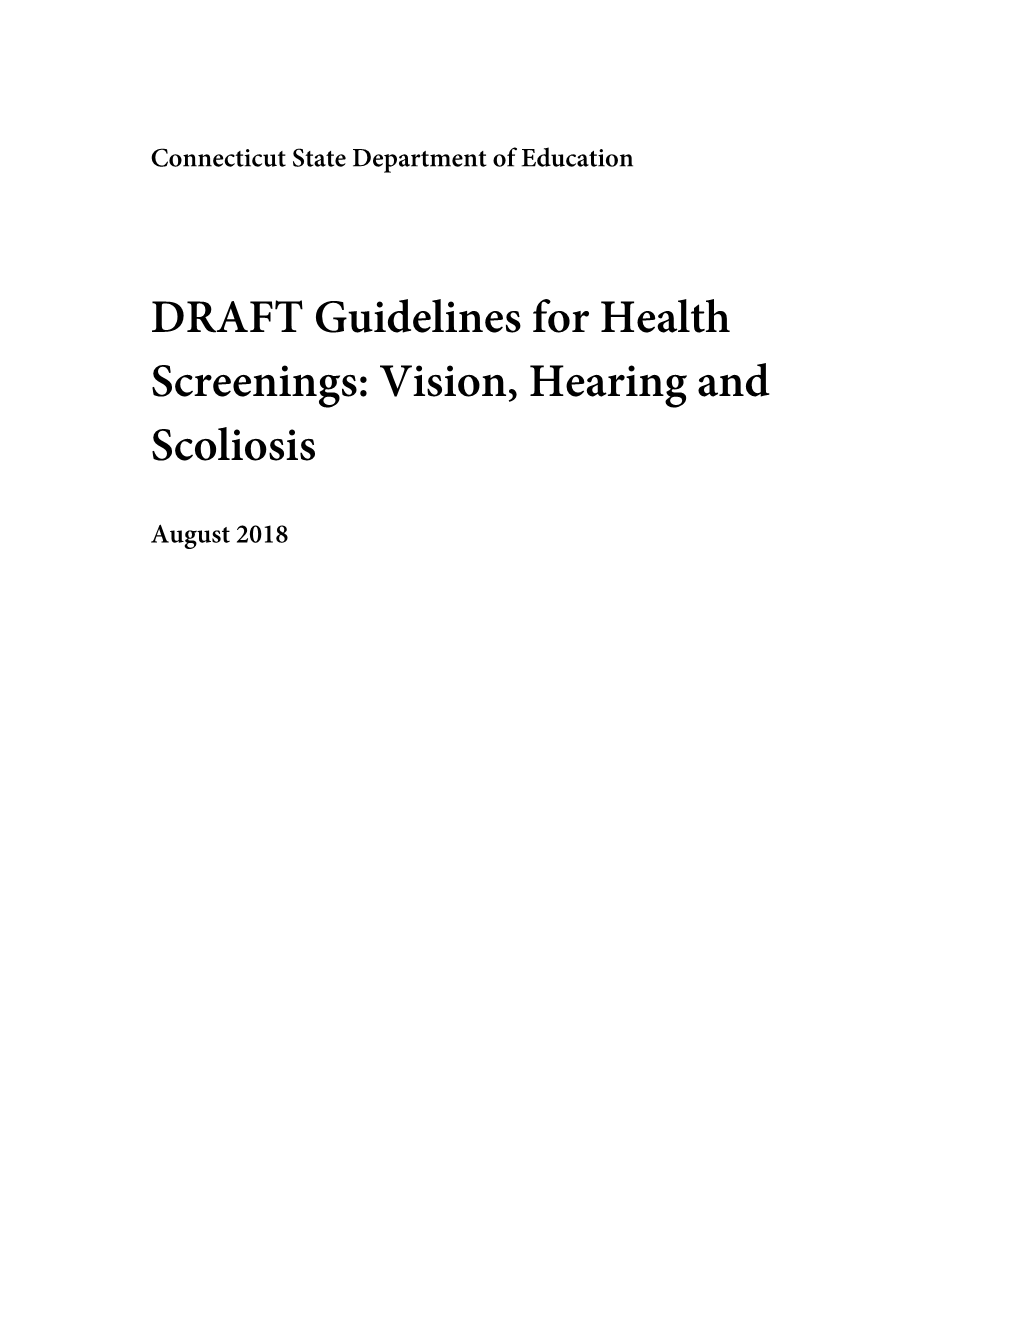 Draft Guidelines for Health Screenings: Vision, Hearing, and Scoliosis